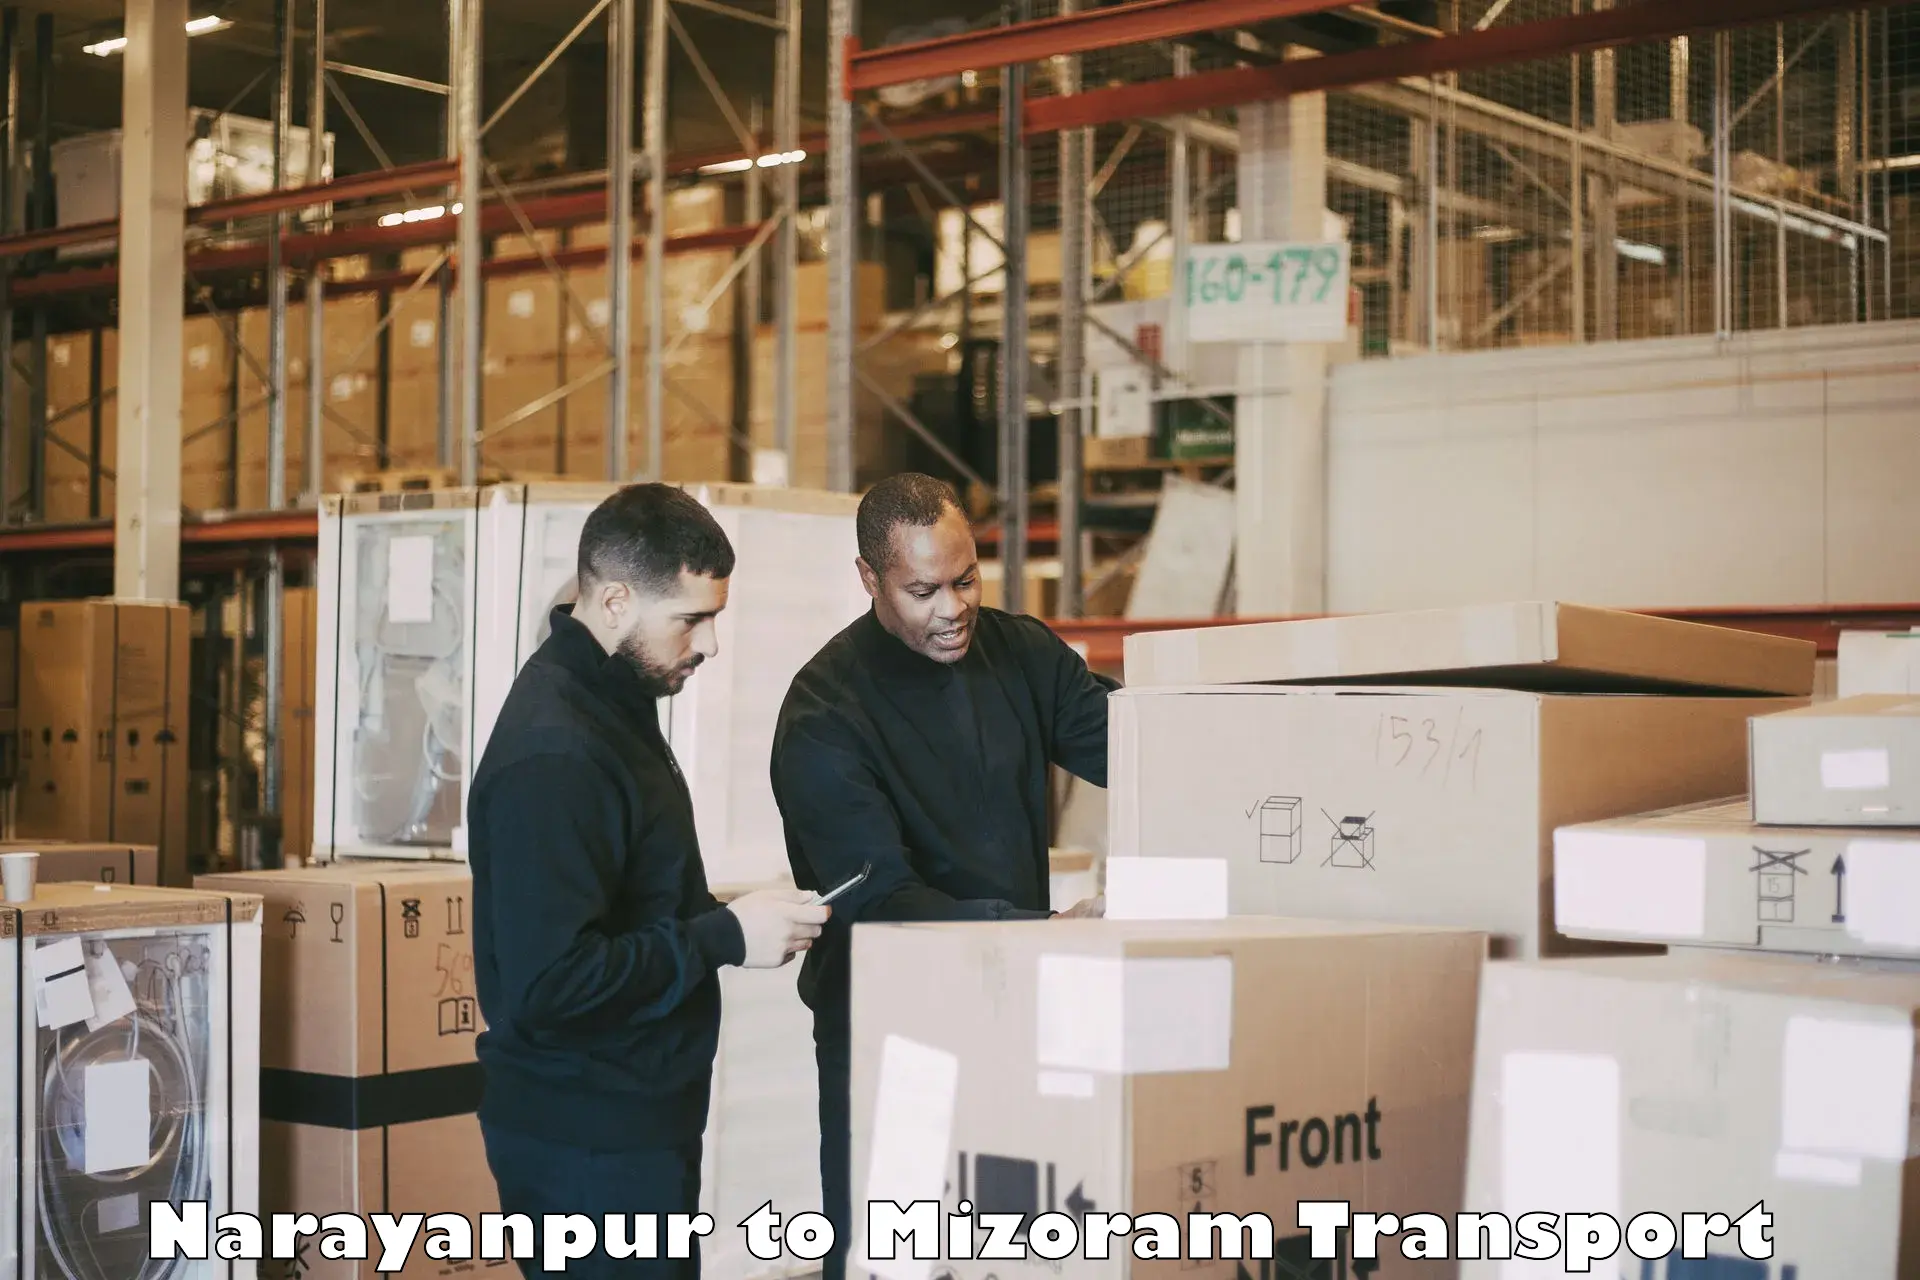 Delivery service Narayanpur to Mizoram